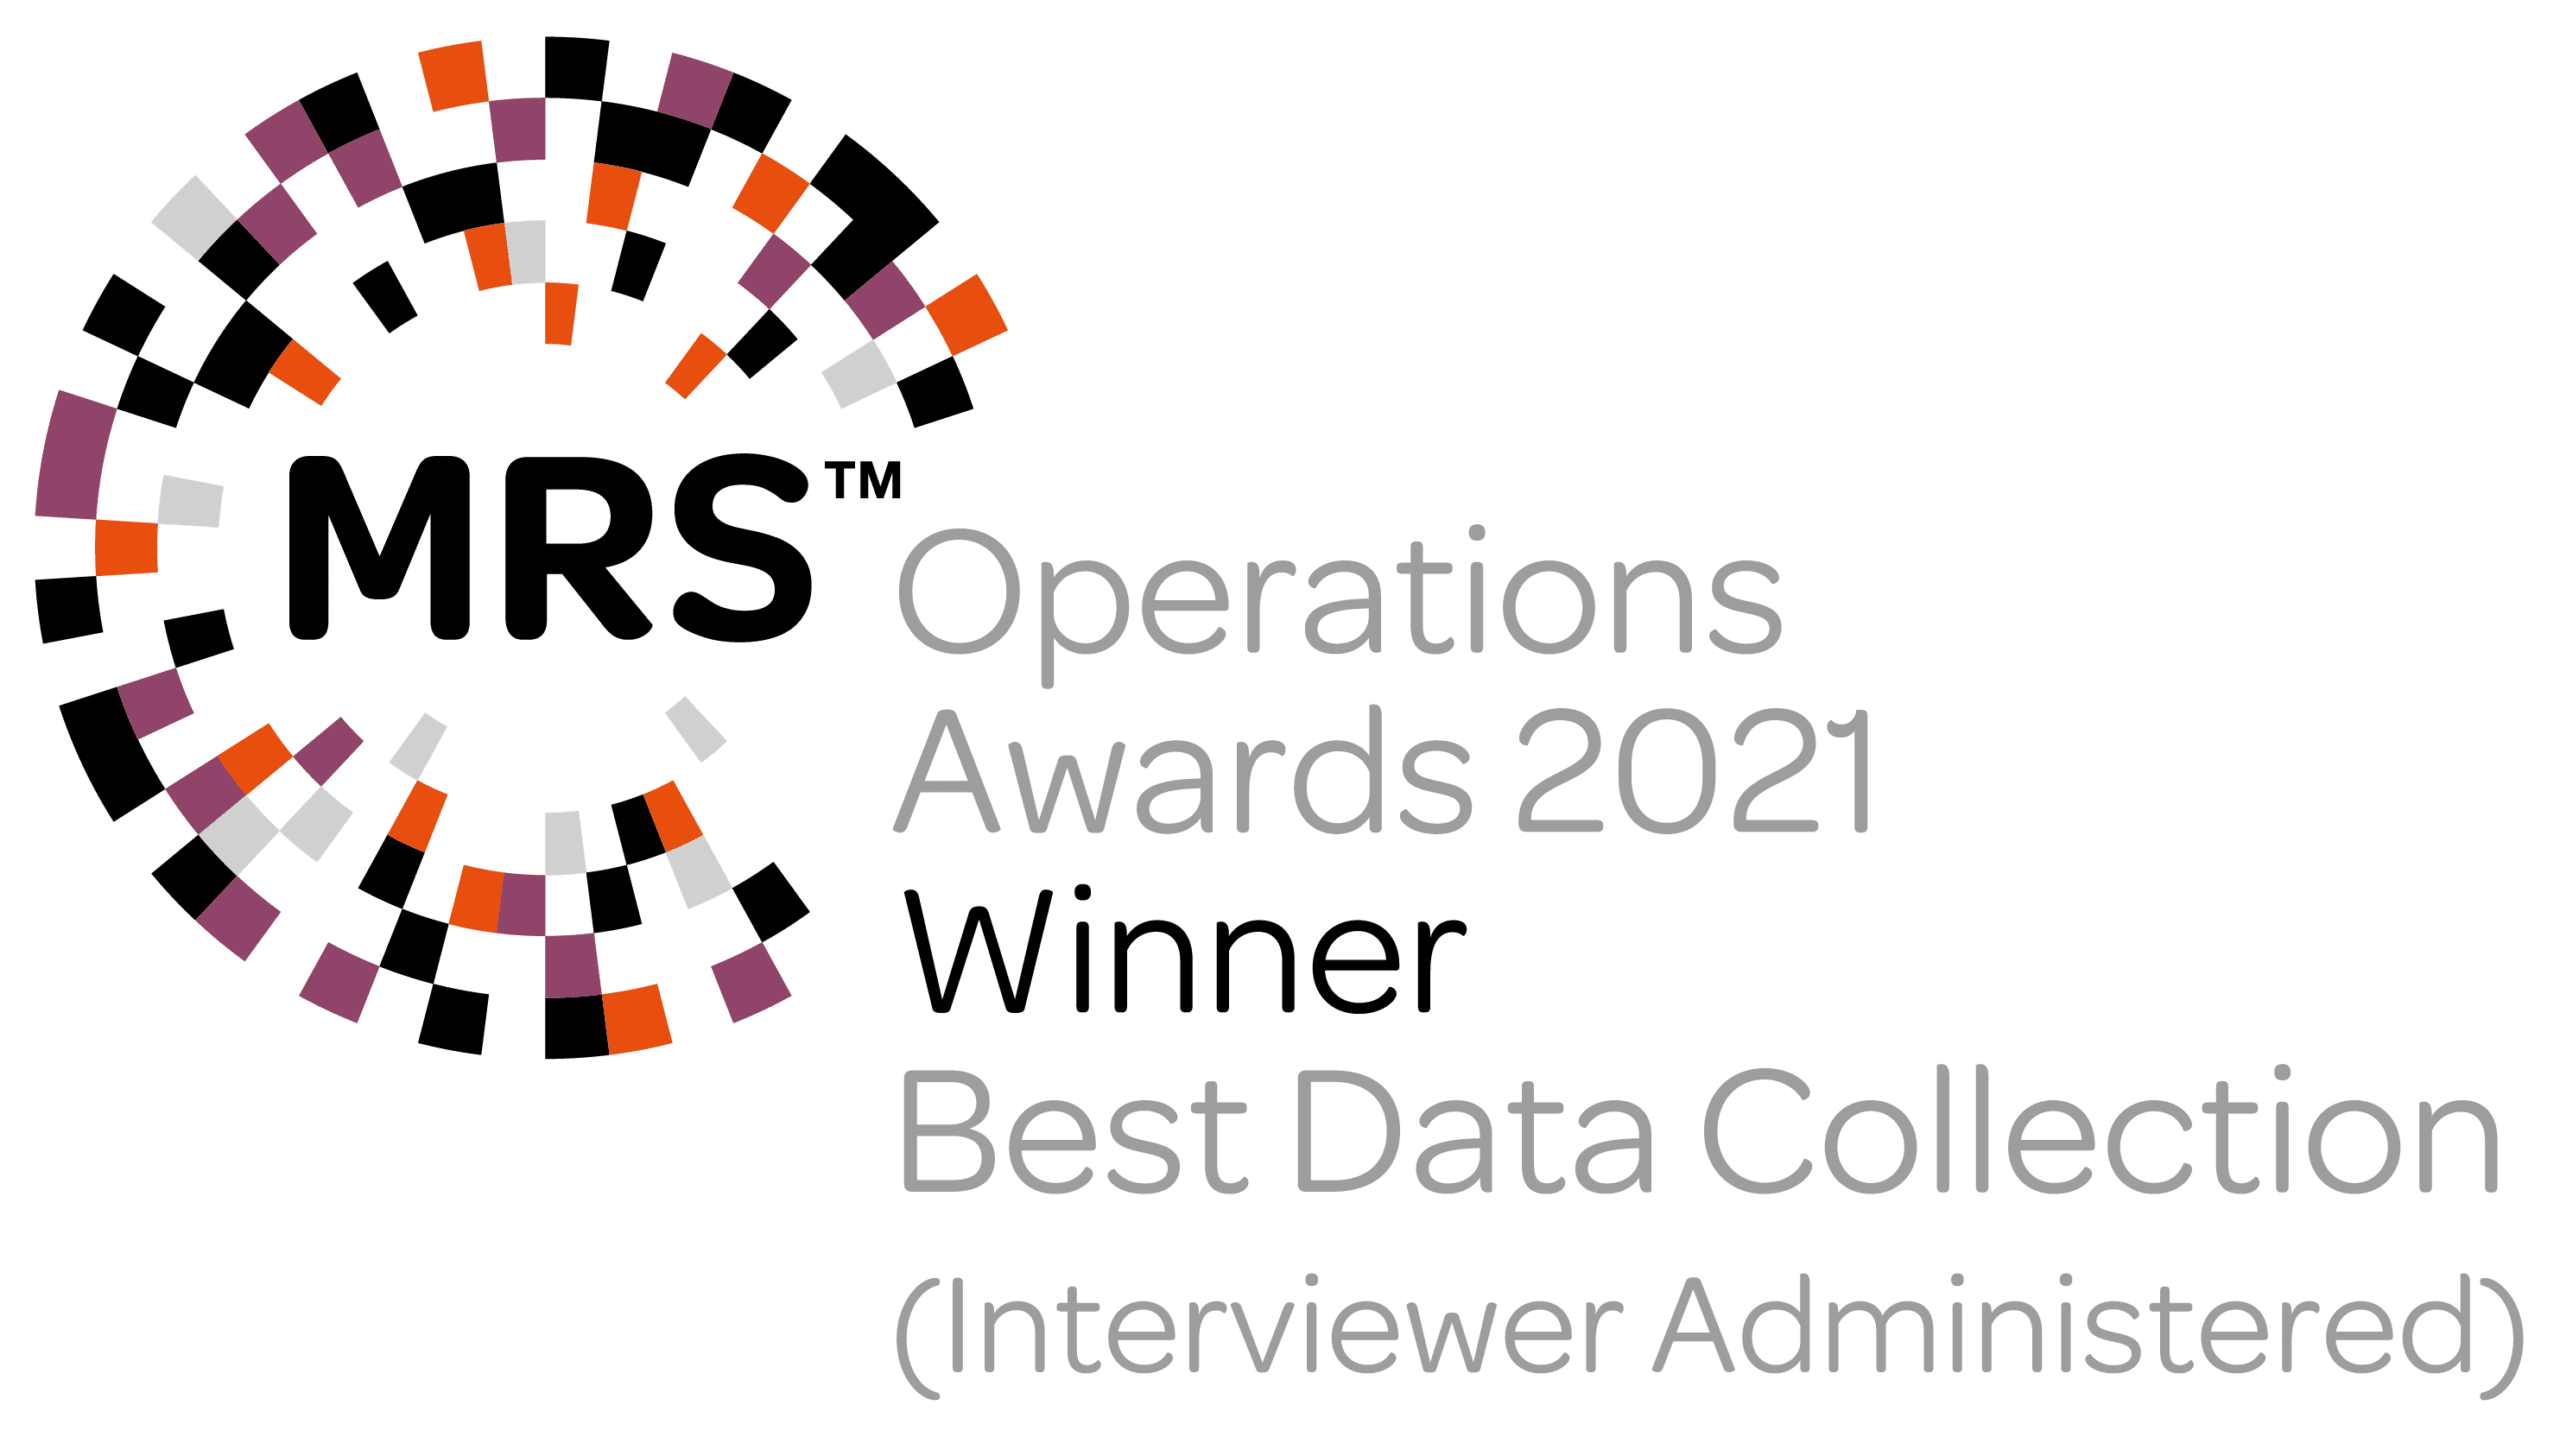 MRS Operations Awards 2021 Winner - Best Data Collection (Interviewer Administered)